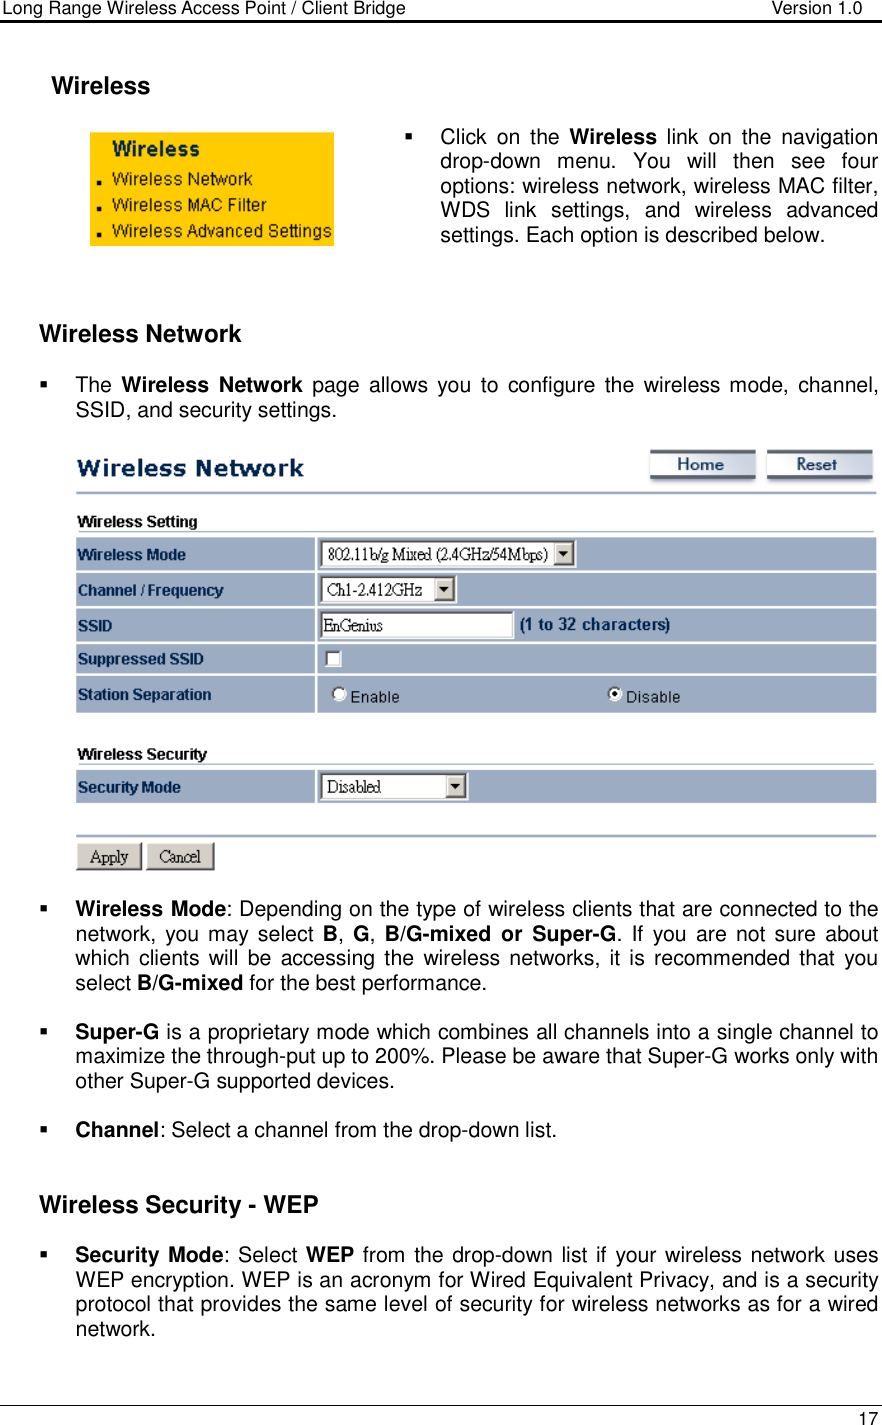 Long Range Wireless Access Point / Client Bridge                                   Version 1.0    17      Wireless   Click  on  the  Wireless  link  on  the  navigation drop-down  menu.  You  will  then  see  four options: wireless network, wireless MAC filter, WDS  link  settings,  and  wireless  advanced settings. Each option is described below.       Wireless Network   The Wireless  Network  page  allows  you  to  configure the wireless mode, channel, SSID, and security settings.      Wireless Mode: Depending on the type of wireless clients that are connected to the network, you may select B,  G,  B/G-mixed  or  Super-G. If  you are not sure about which clients will be  accessing  the wireless  networks,  it  is recommended  that you select B/G-mixed for the best performance.     Super-G is a proprietary mode which combines all channels into a single channel to maximize the through-put up to 200%. Please be aware that Super-G works only with other Super-G supported devices.   Channel: Select a channel from the drop-down list.      Wireless Security - WEP  Security Mode: Select WEP from the drop-down list if your wireless network uses WEP encryption. WEP is an acronym for Wired Equivalent Privacy, and is a security protocol that provides the same level of security for wireless networks as for a wired network.   